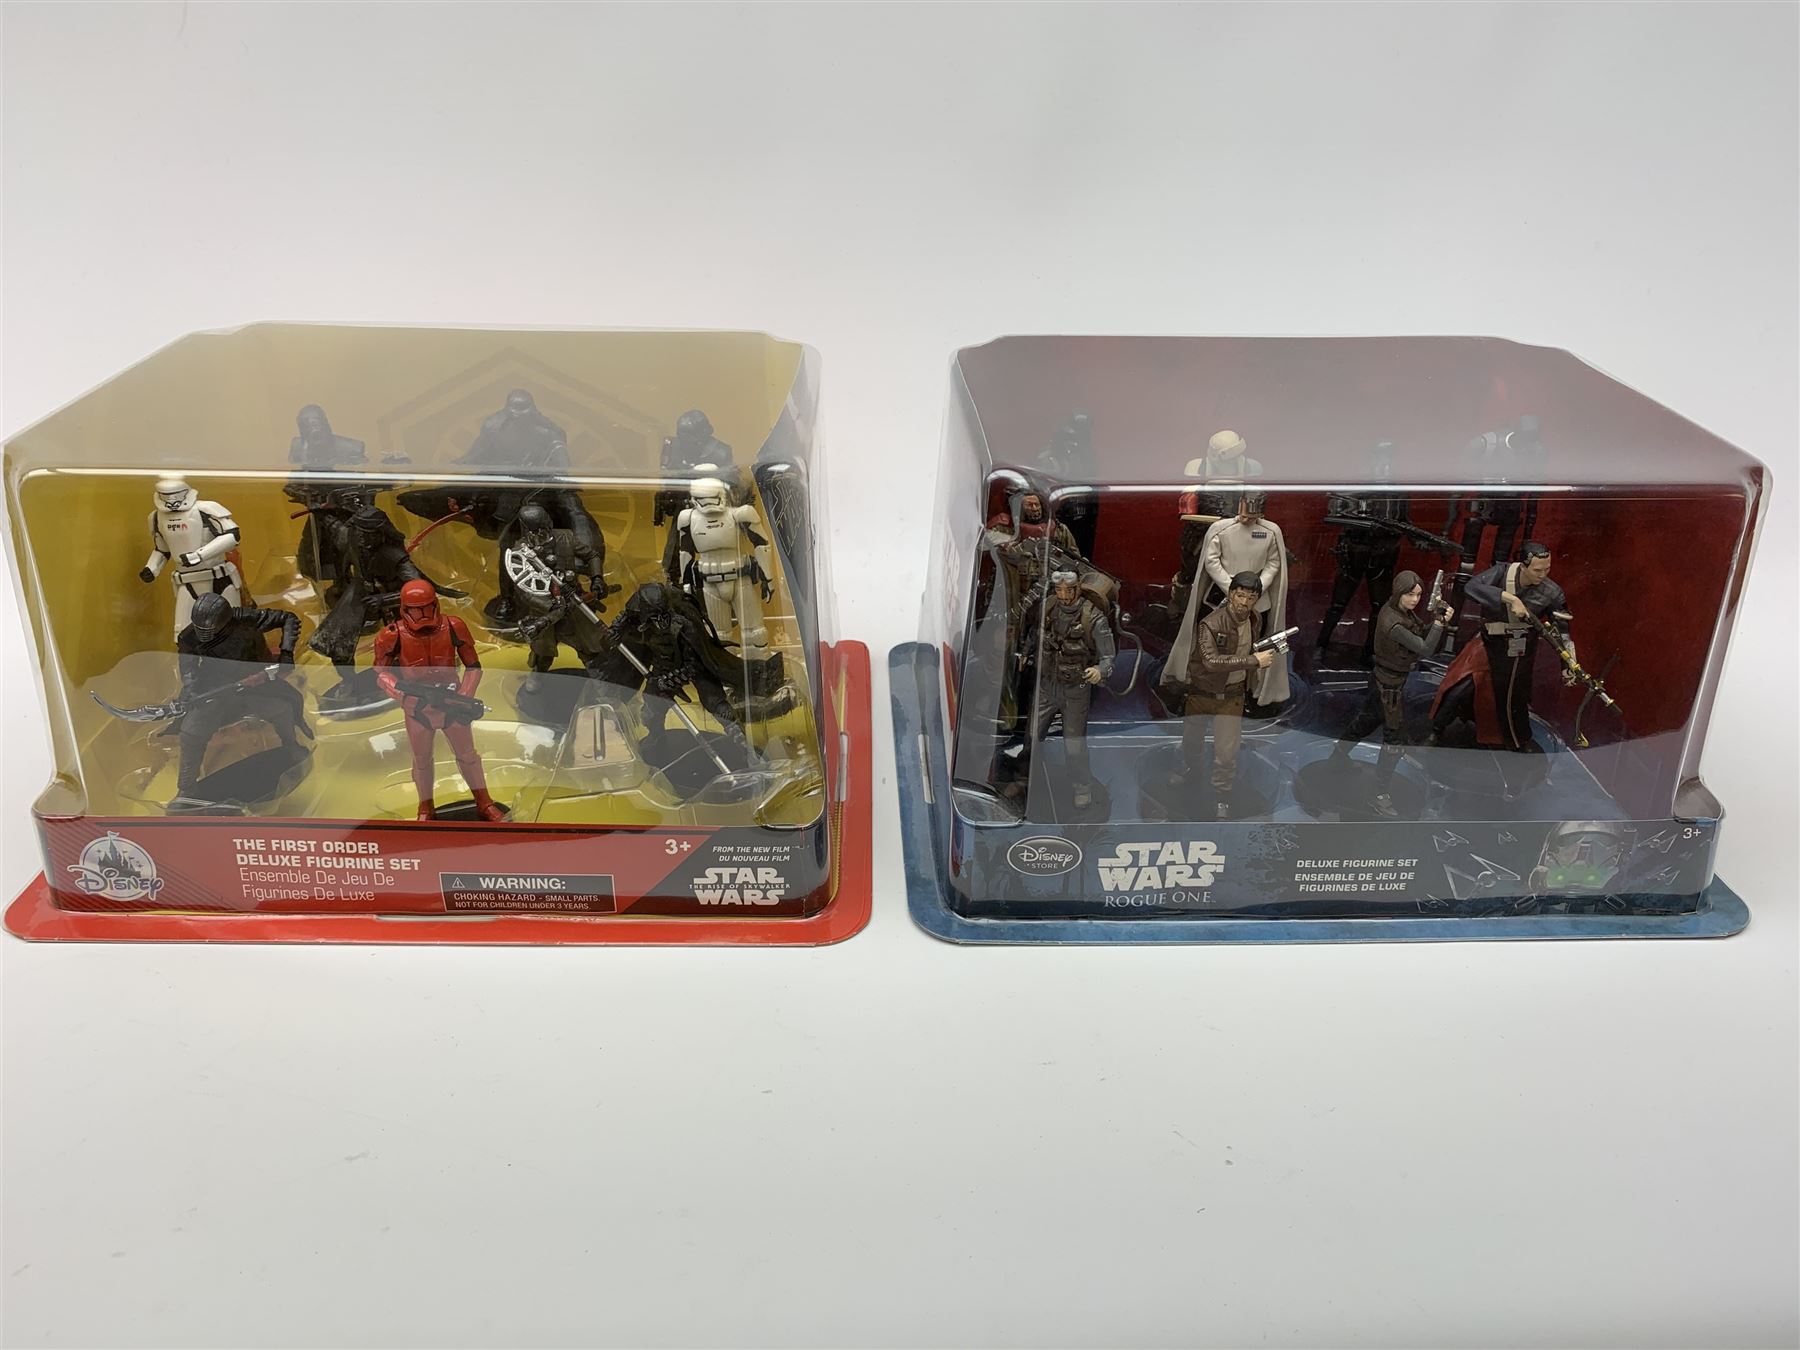 Star Wars - five Disney Store Deluxe figurine sets for The Last Jedi - Image 4 of 5